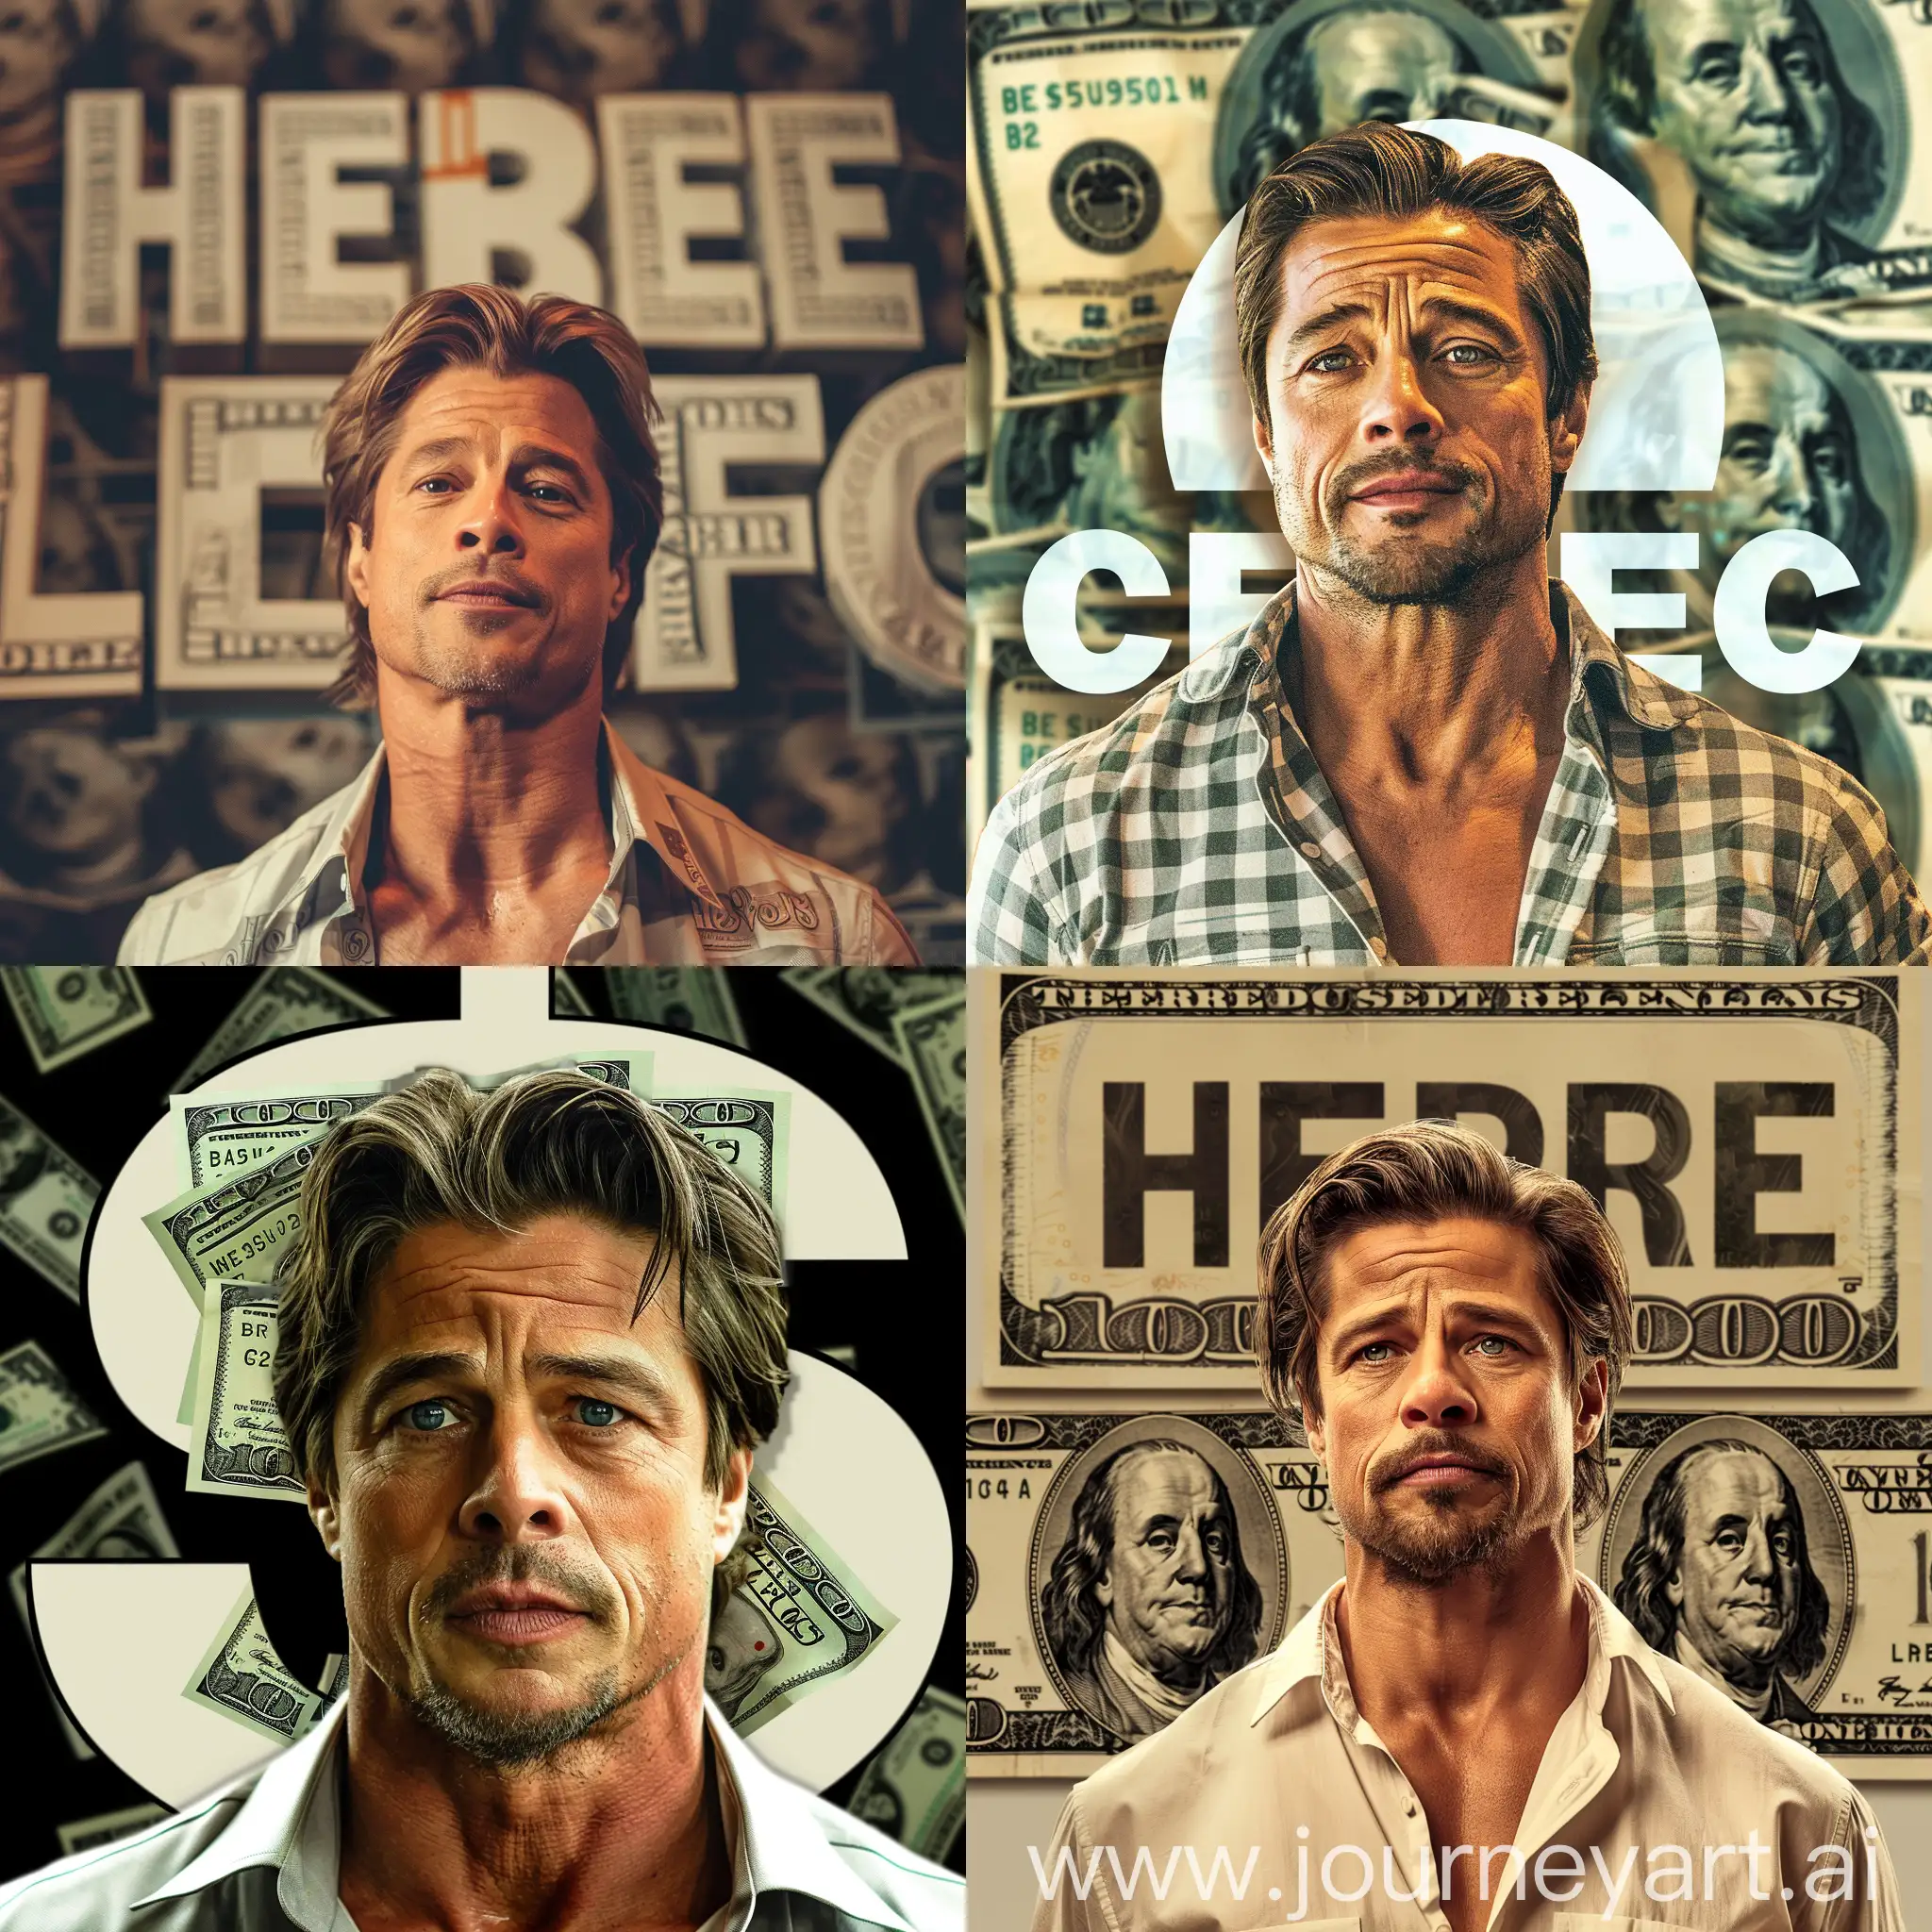 Brad-Pitt-Surrounded-by-Dollar-Signs-Celebrity-and-Wealth-Symbolism-Artwork